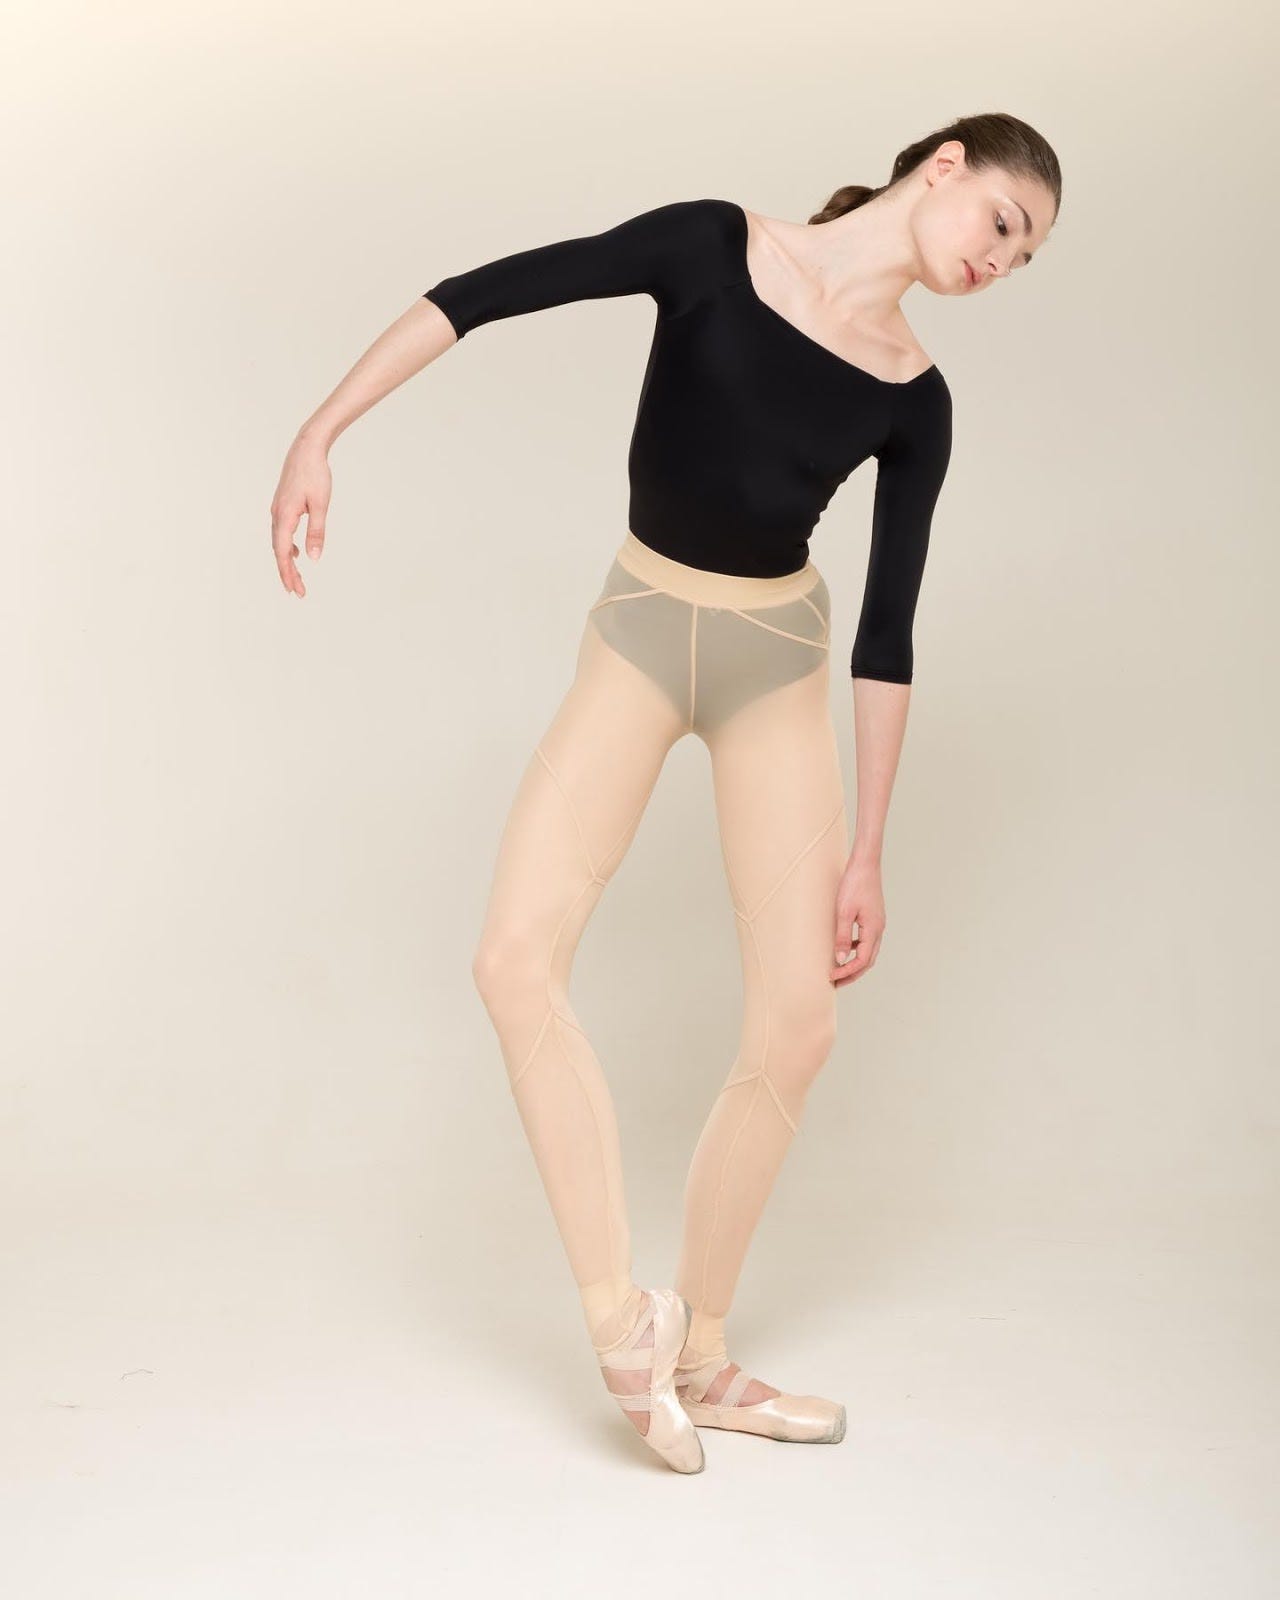 How to choose your first leotard for an adult ballet class: check